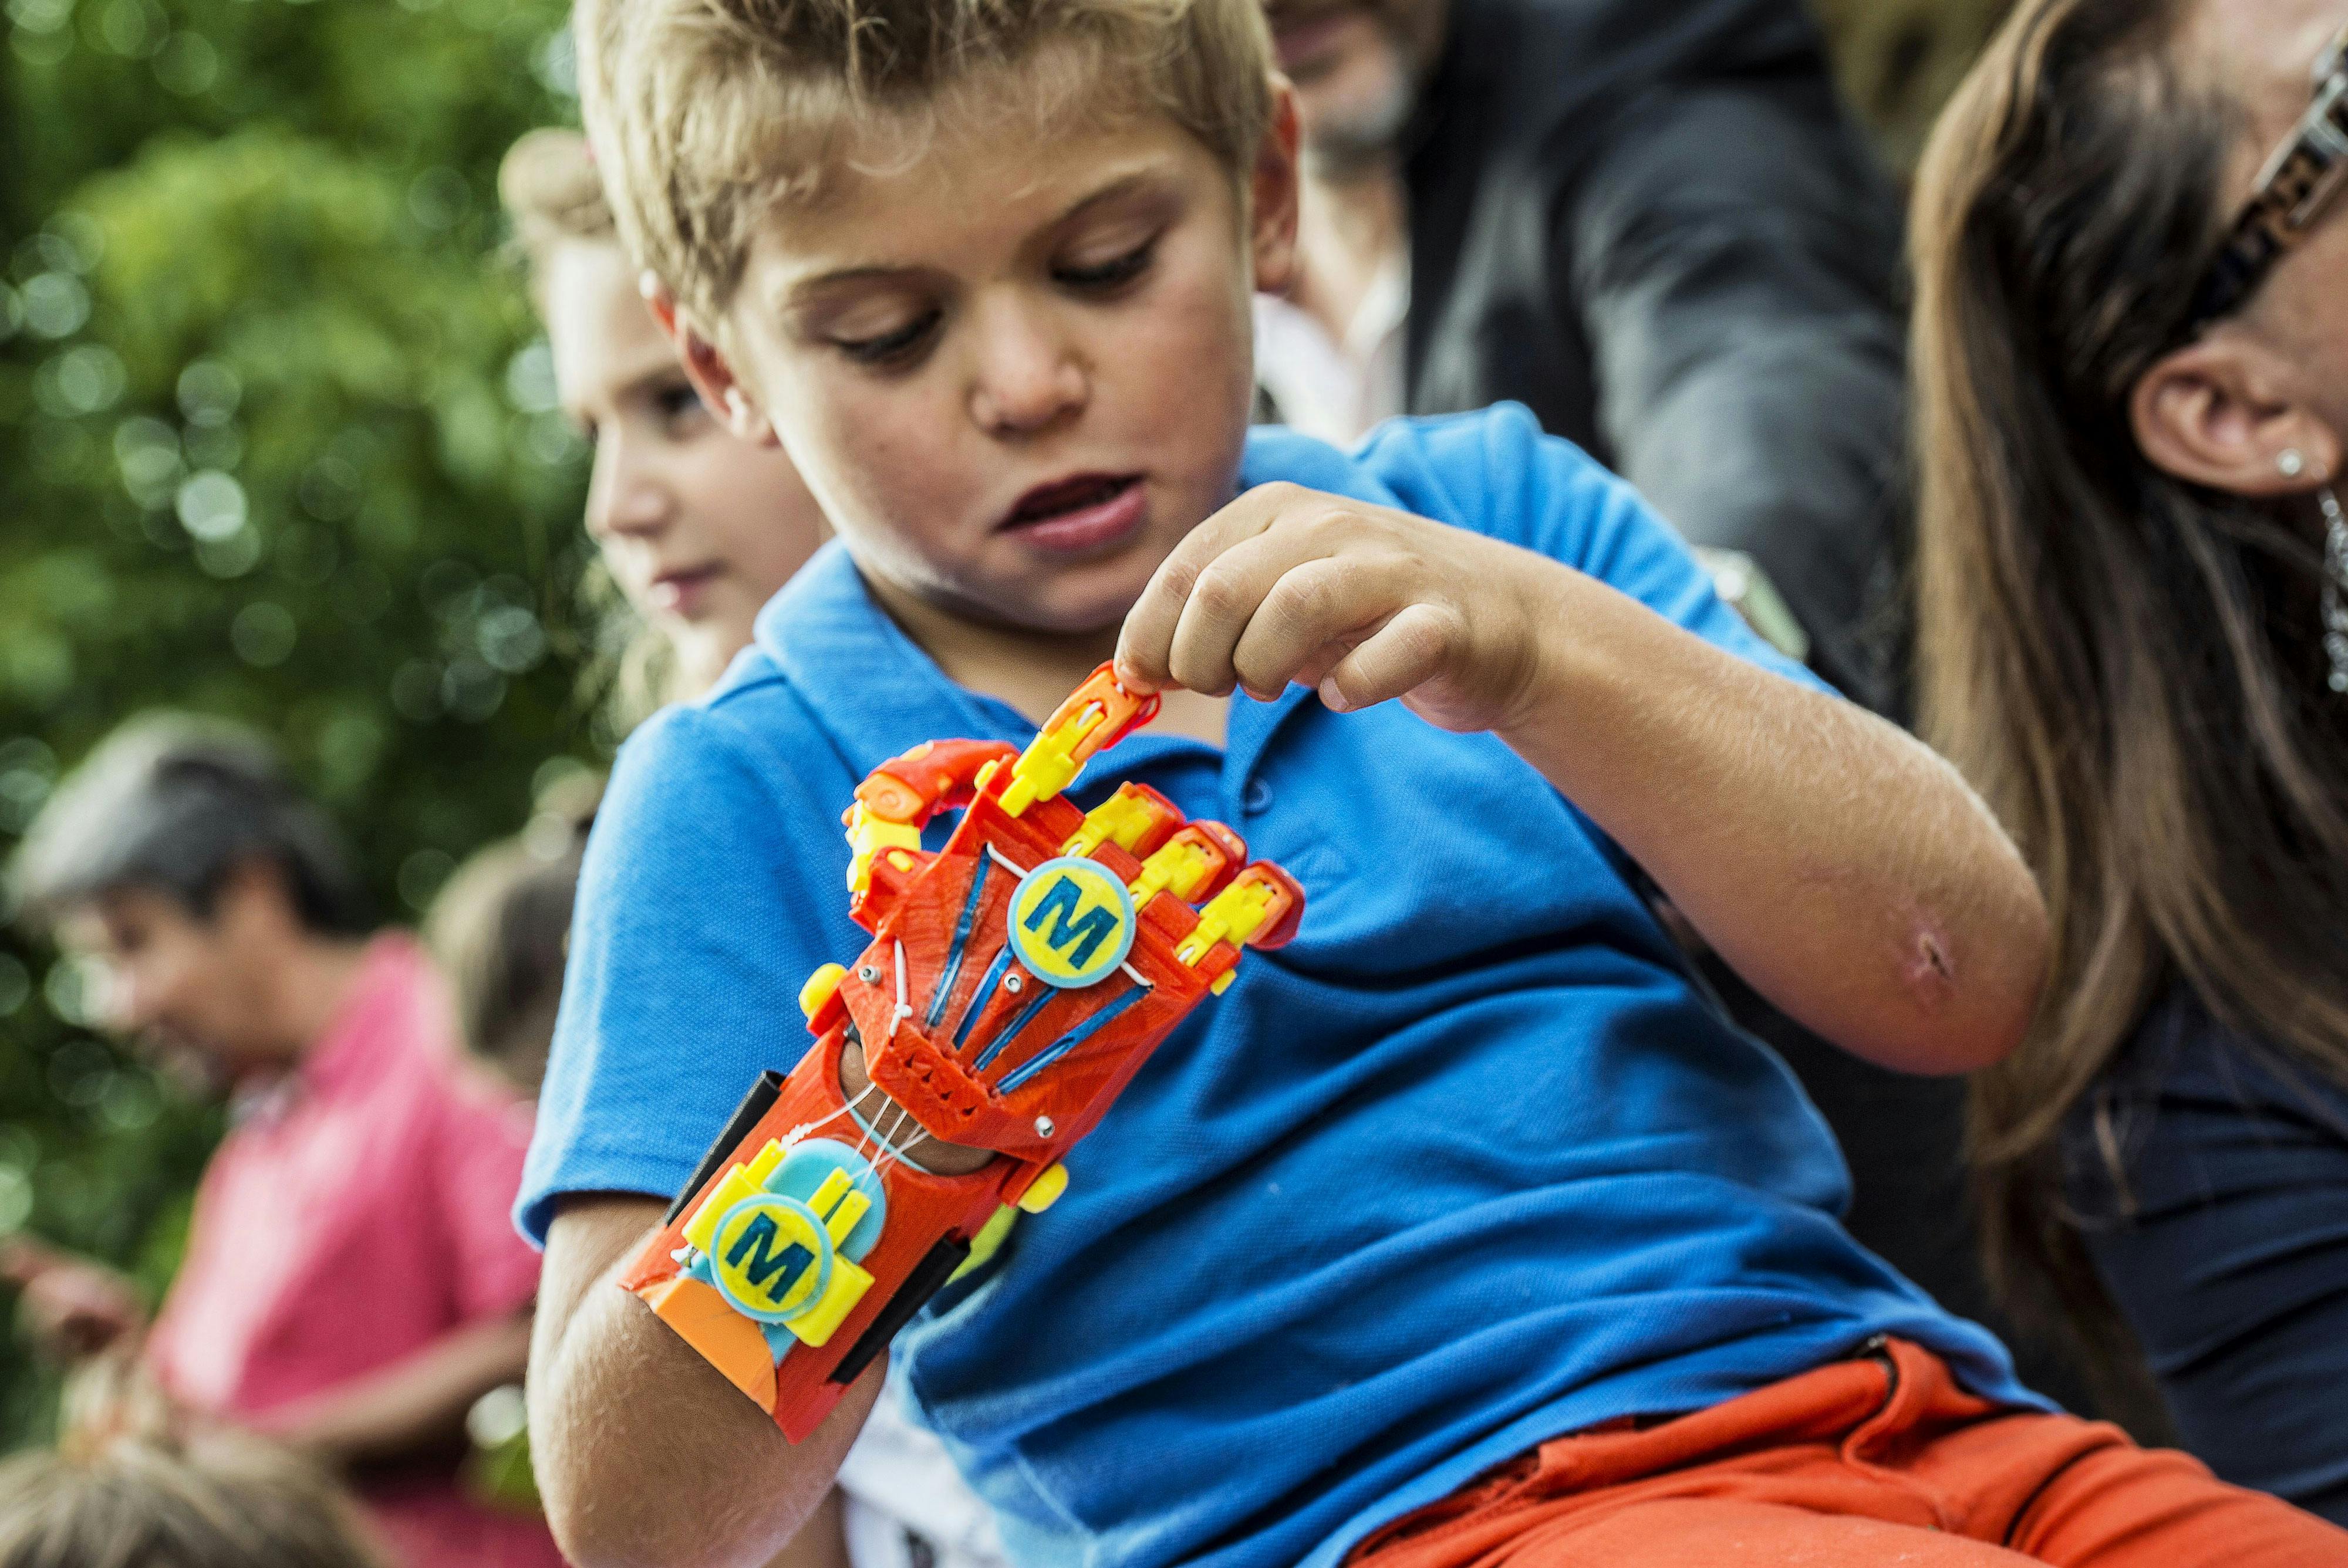 Kindness 3d is turning cannabis waste into prosthetic limbs. Here, a kid is shown examining his new 3d printed hand